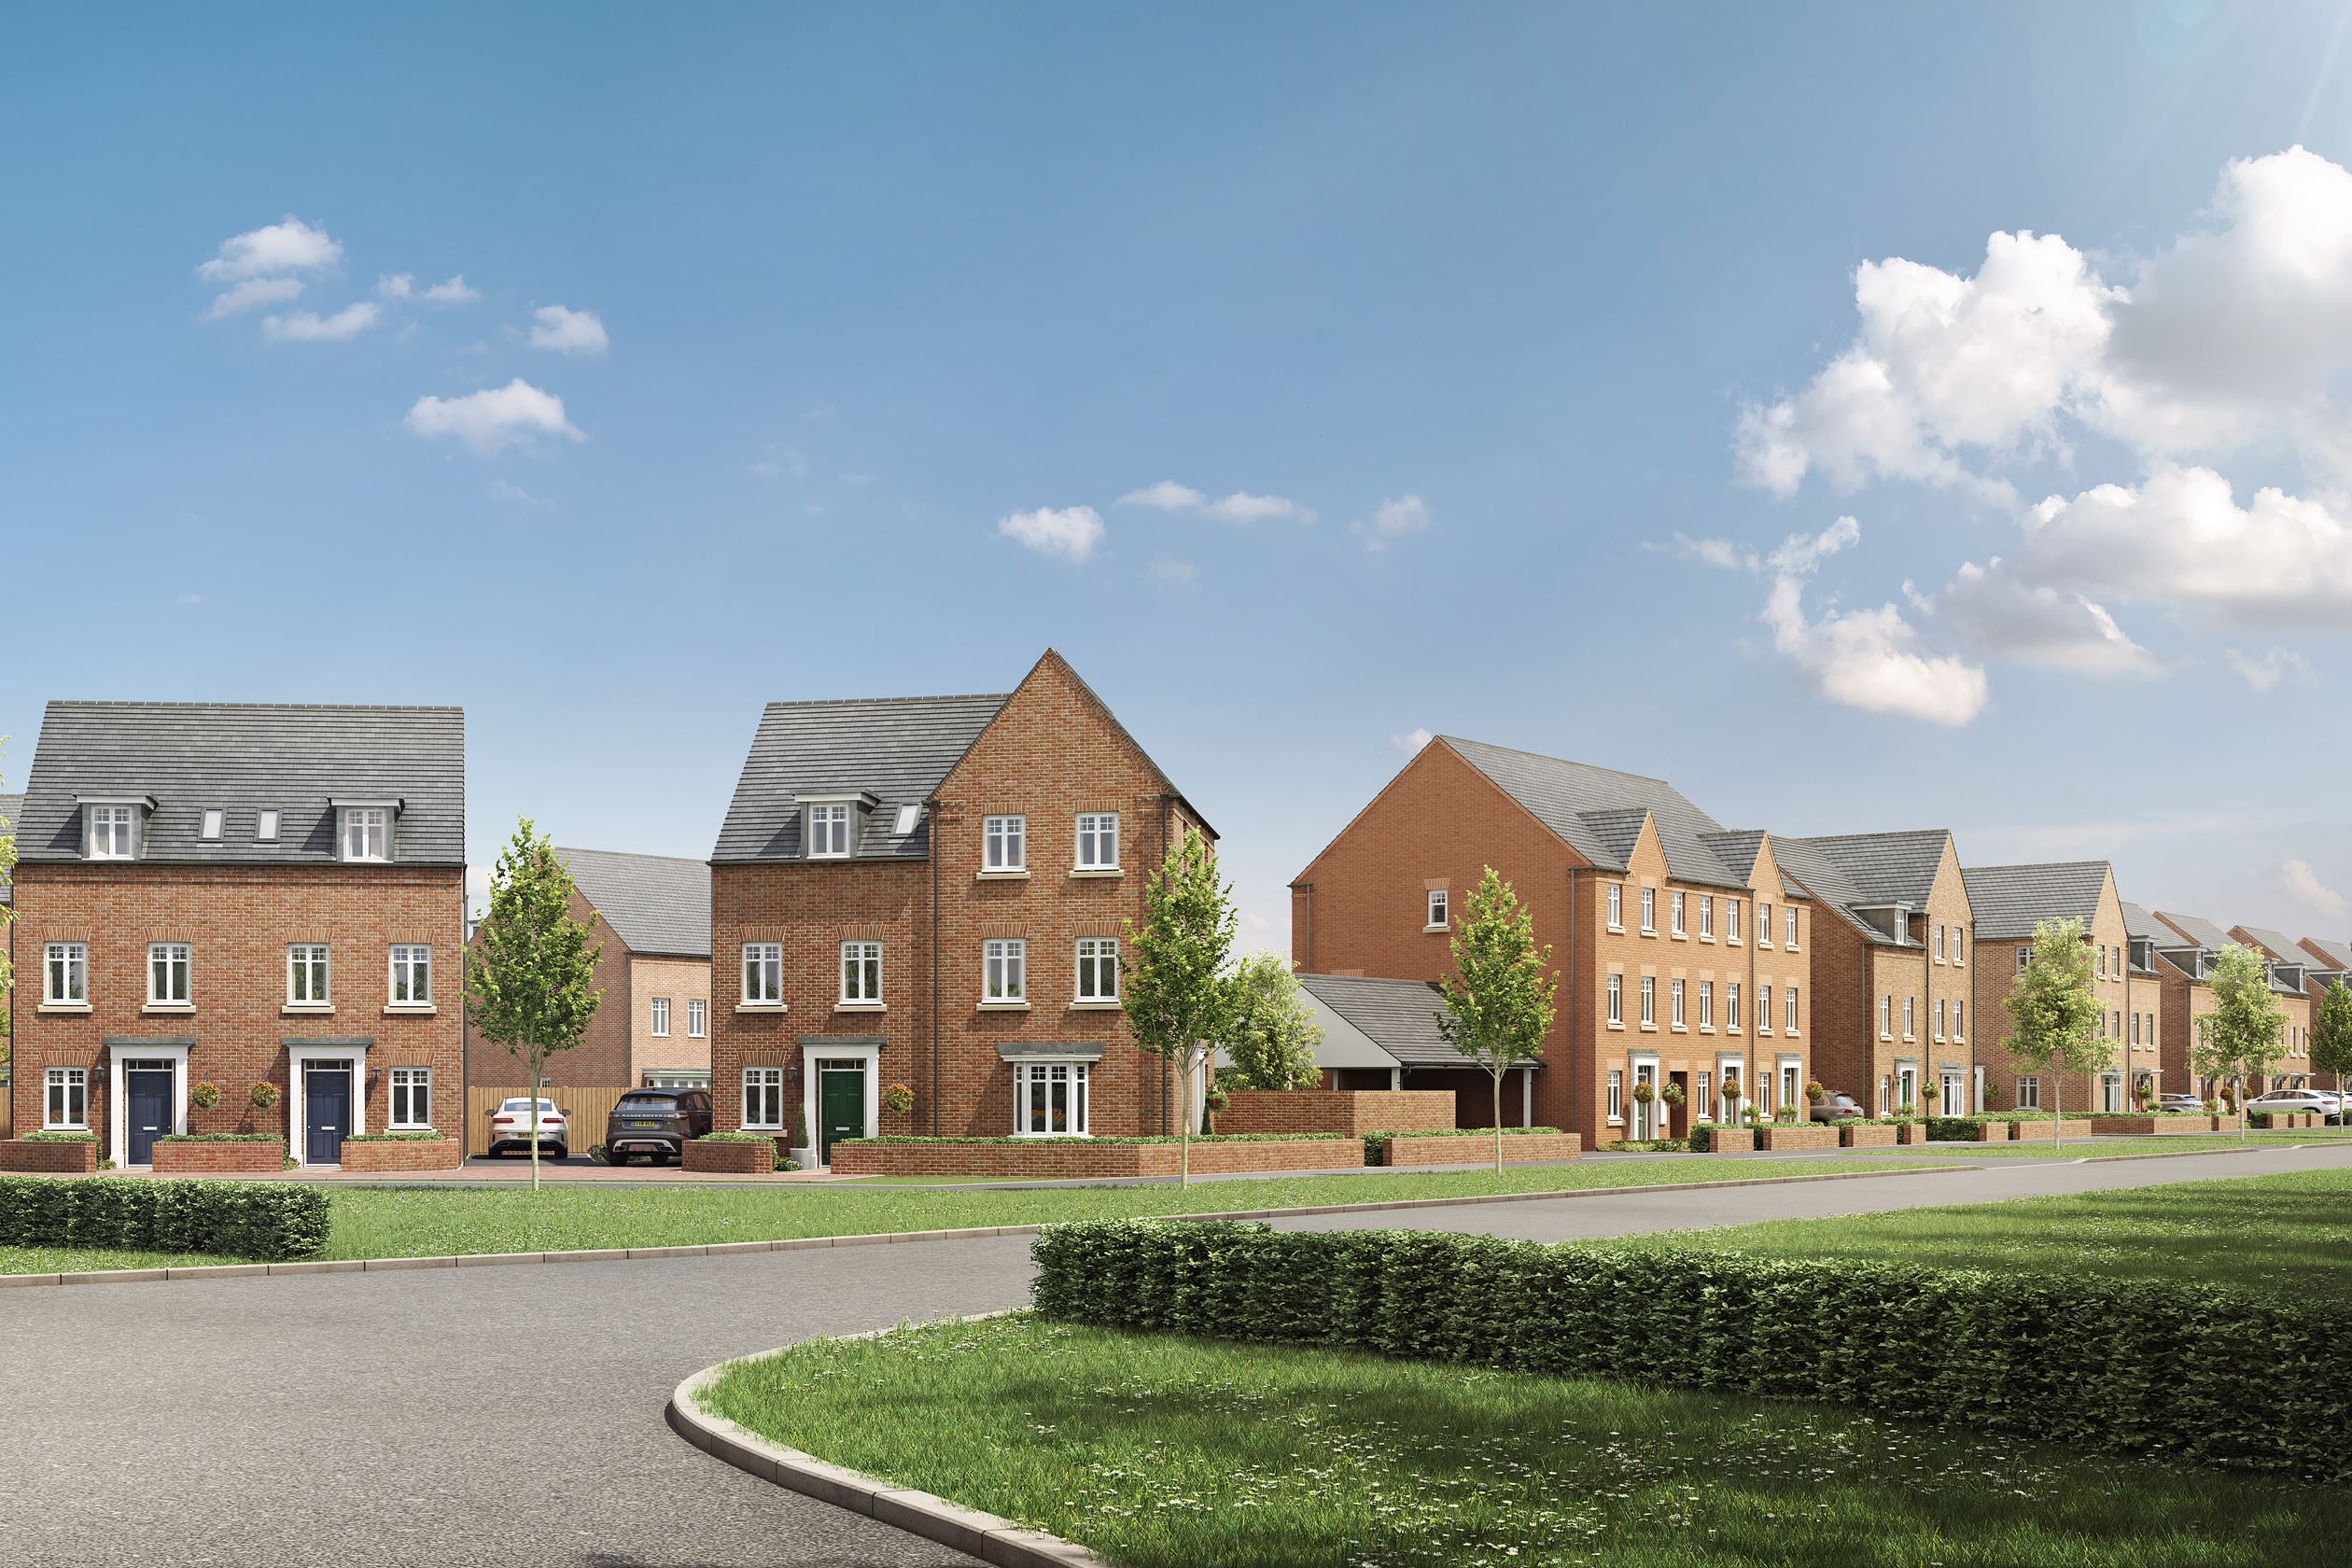 New Homes For Sale In Bourne David Wilson Homes